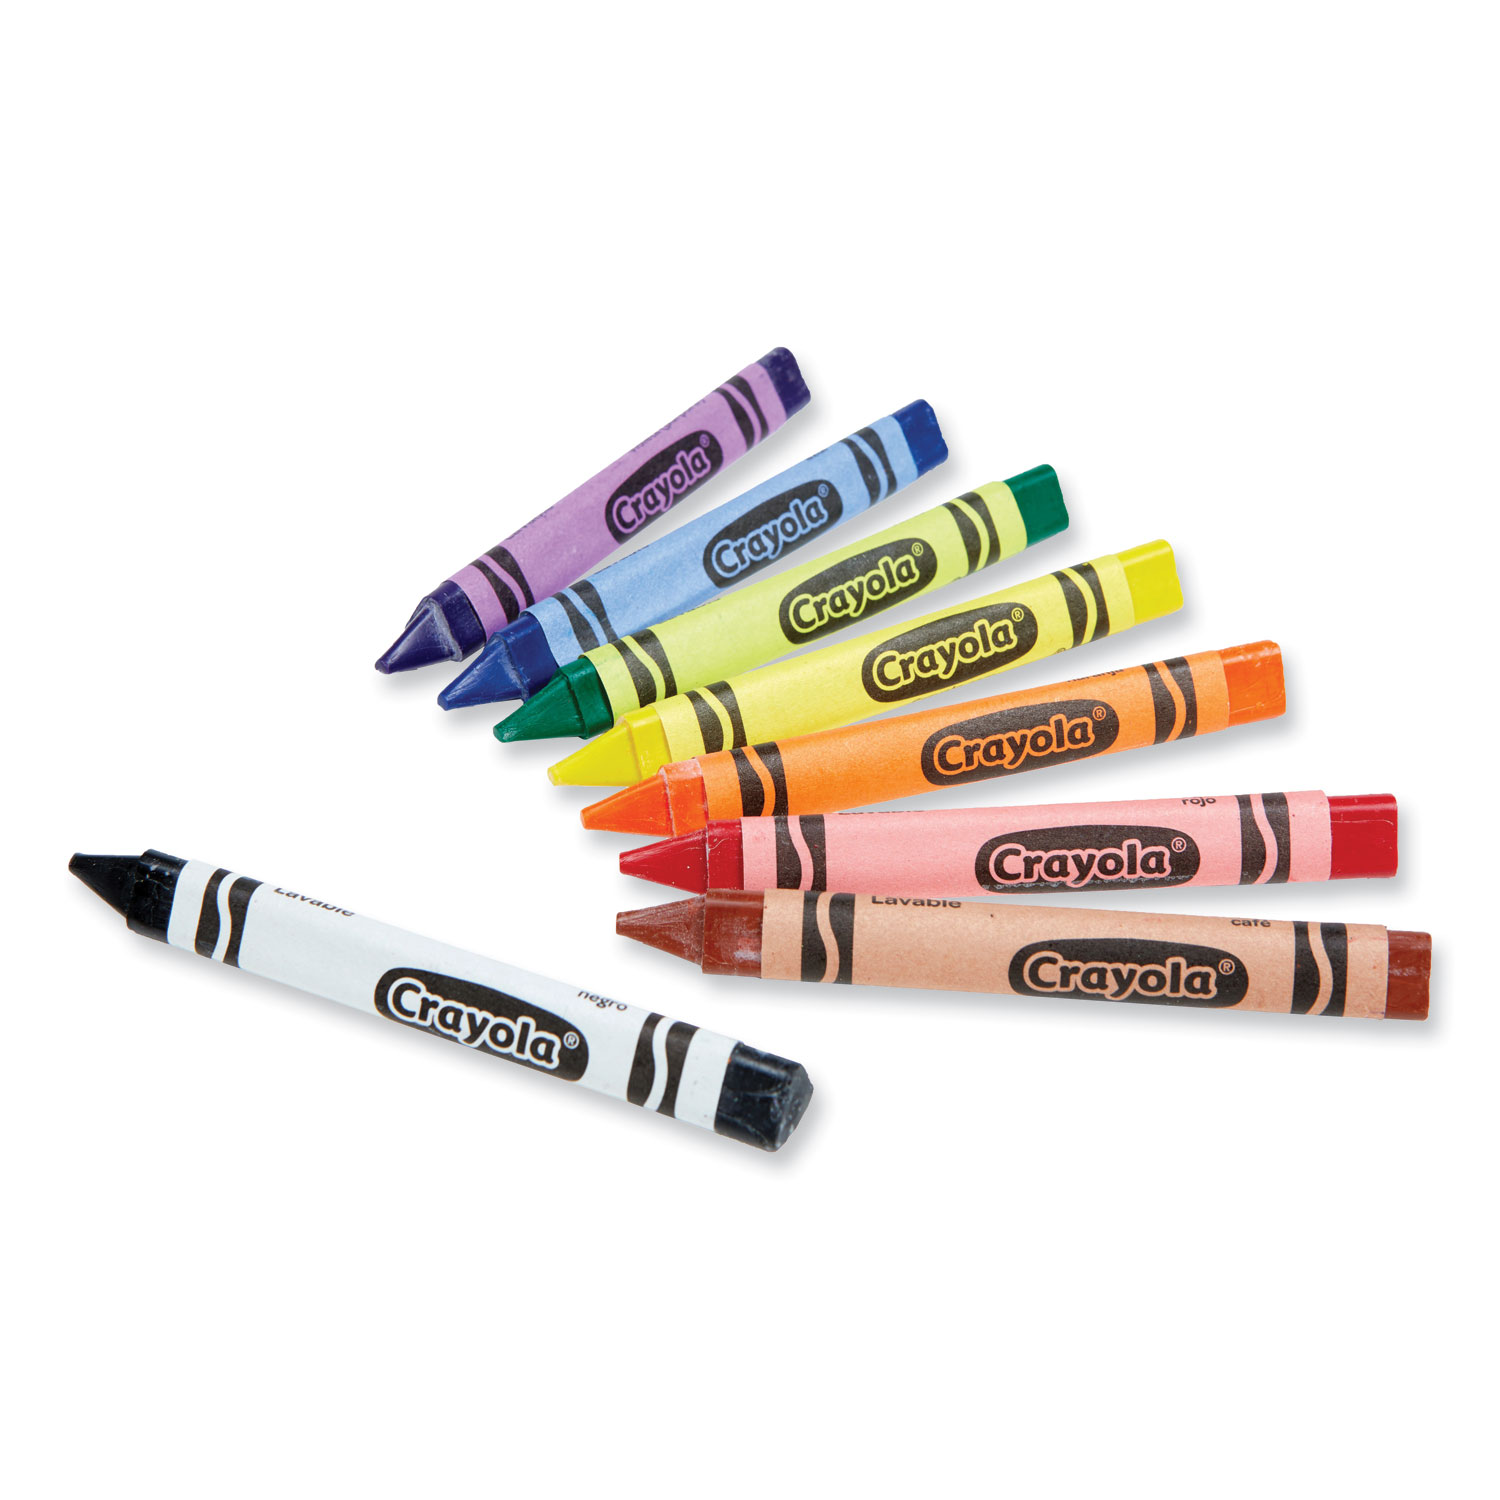 81-1460 Crayola Washable Tripod Grip Crayons Assorted Colors 8